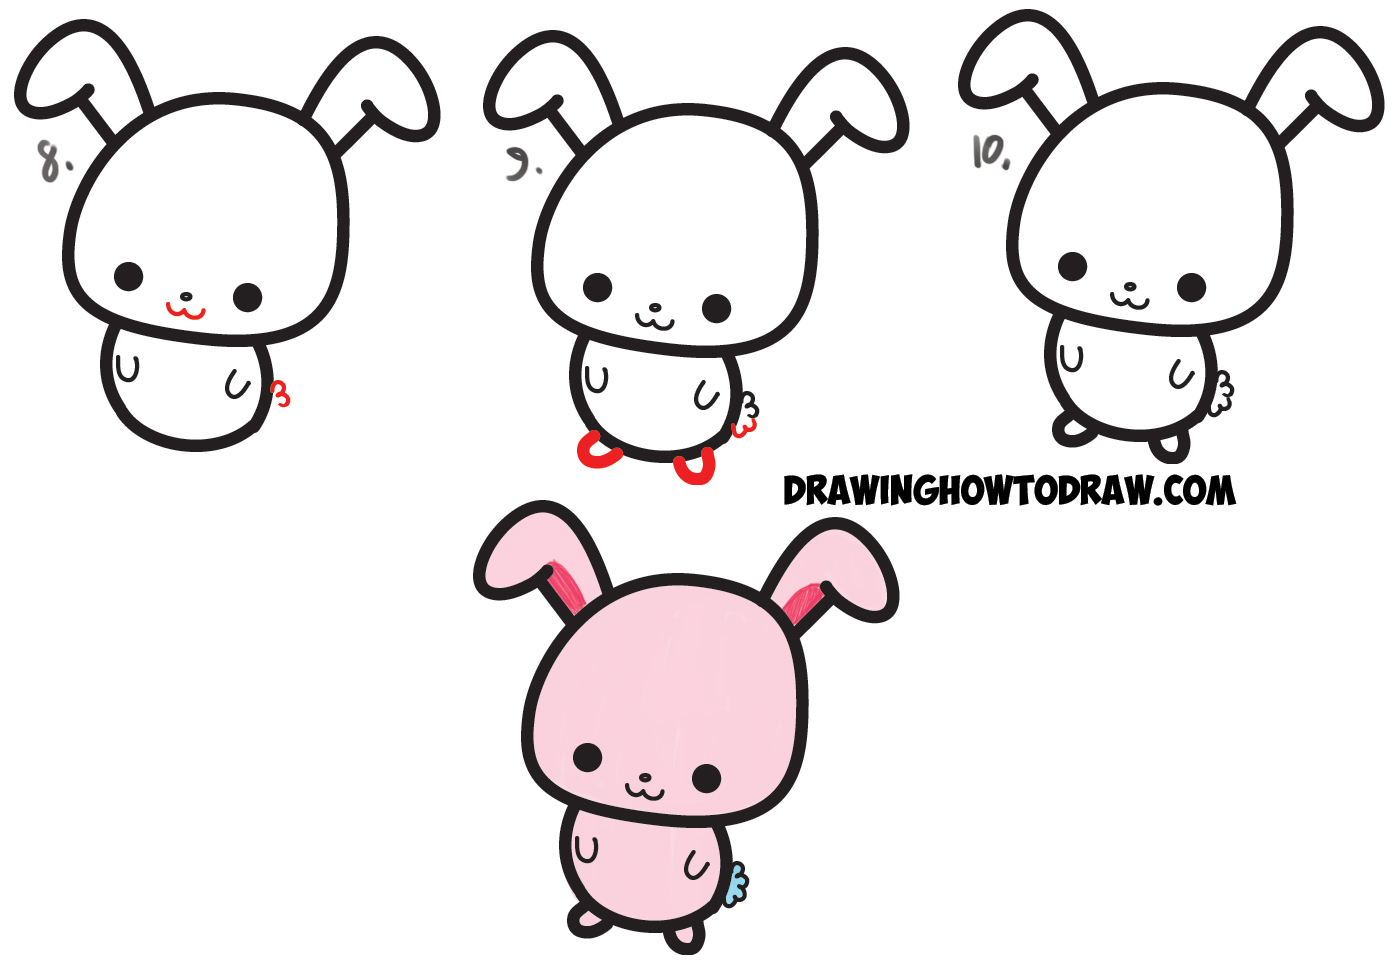 How to Draw Cute Cartoon Characters from Semicolons - Easy Step by Step